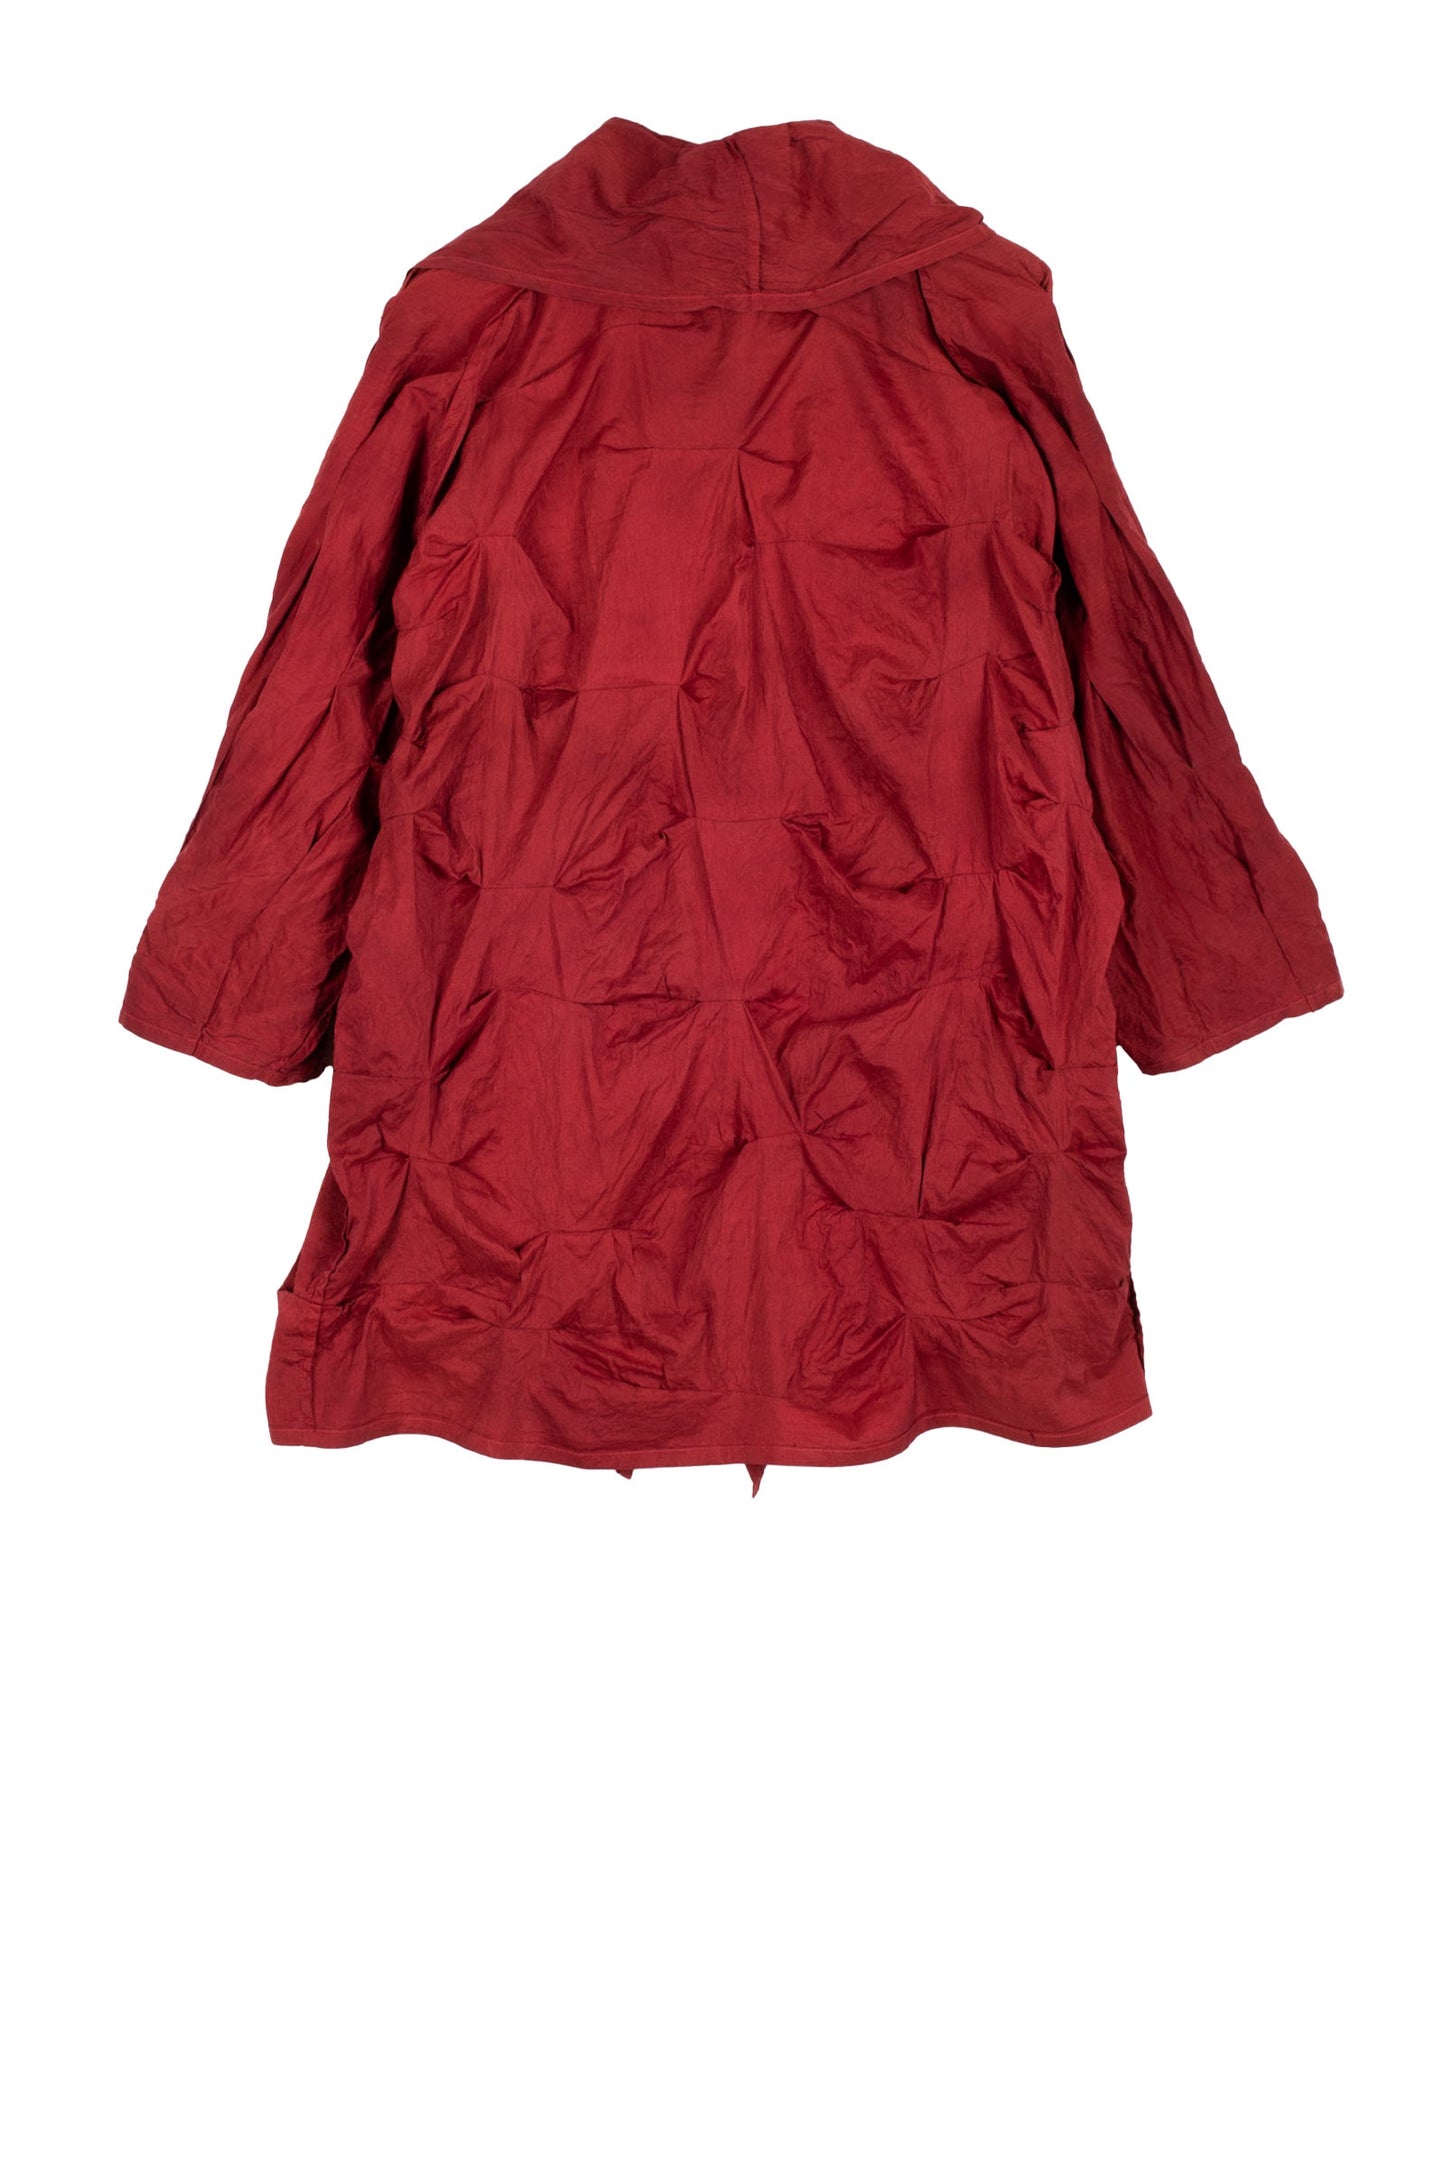 DYED COTTON SILK HEAVY VOILE WAVY TUCK COCOON JACKET - dh1063-red -